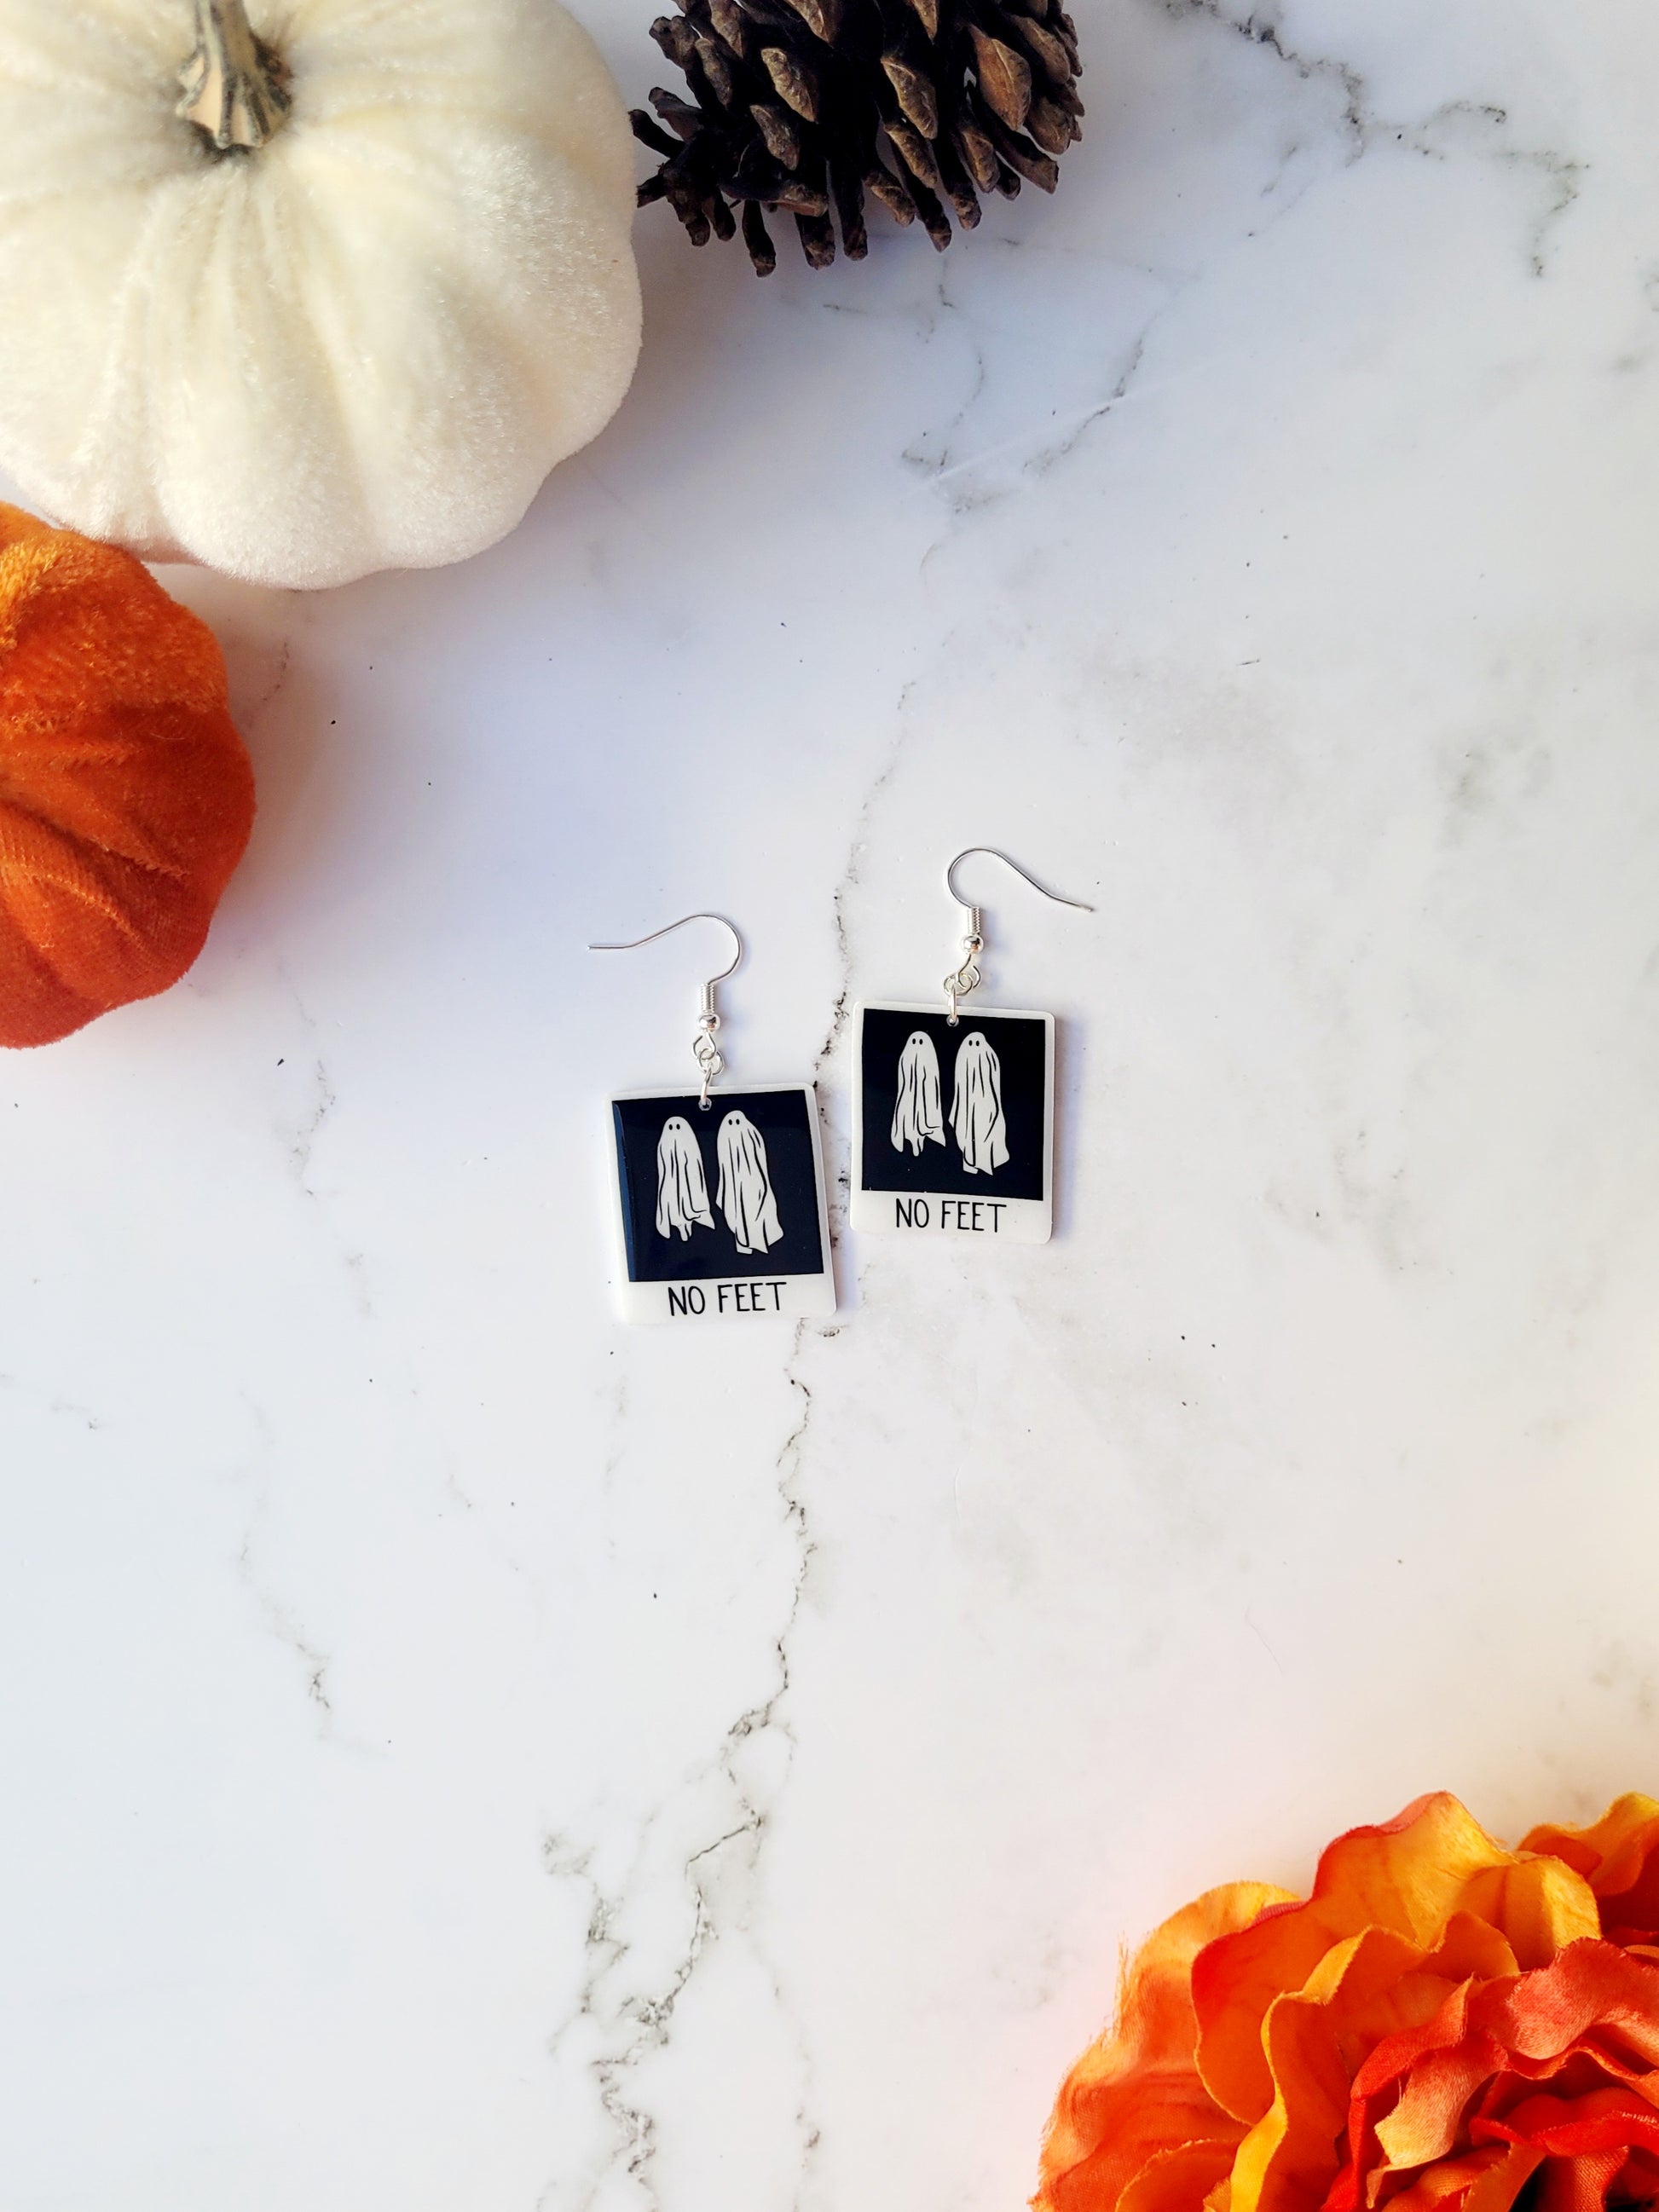 Beetlejuice inspired "no feet" ghost polaroid earrings on a marble background with fall foliage. 